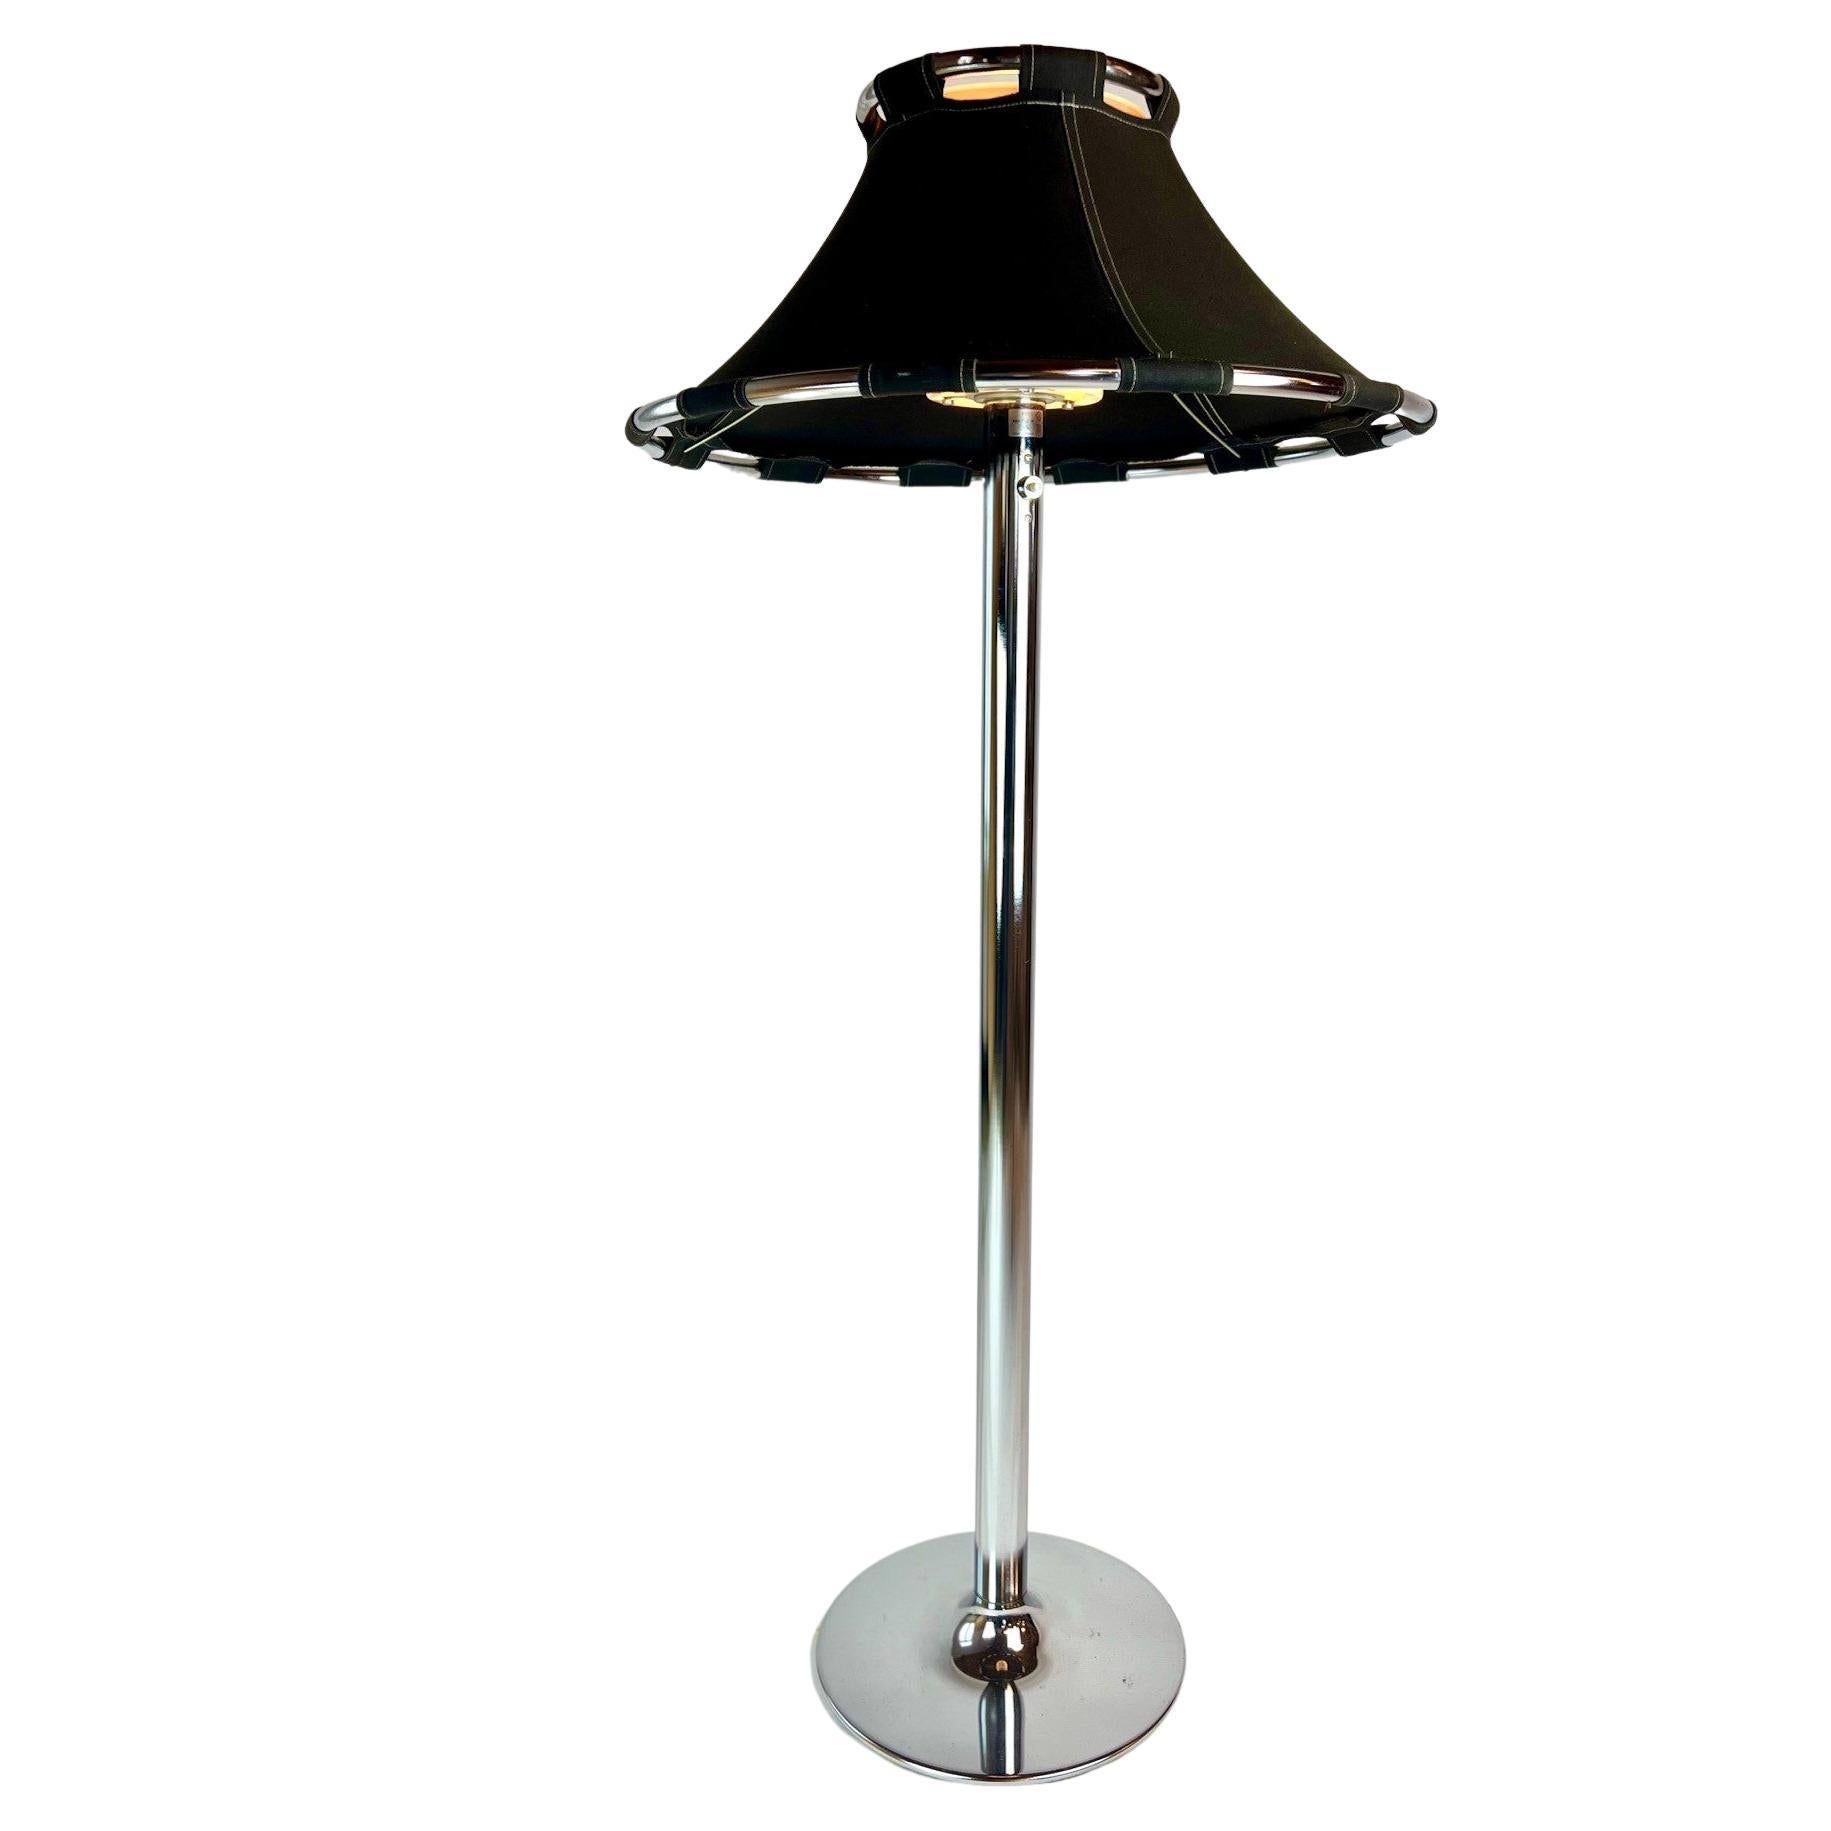 Floor Lamp in Chrome and Black Fabric "Anna" by Anna Ehrner for Ateljé Lyktan For Sale